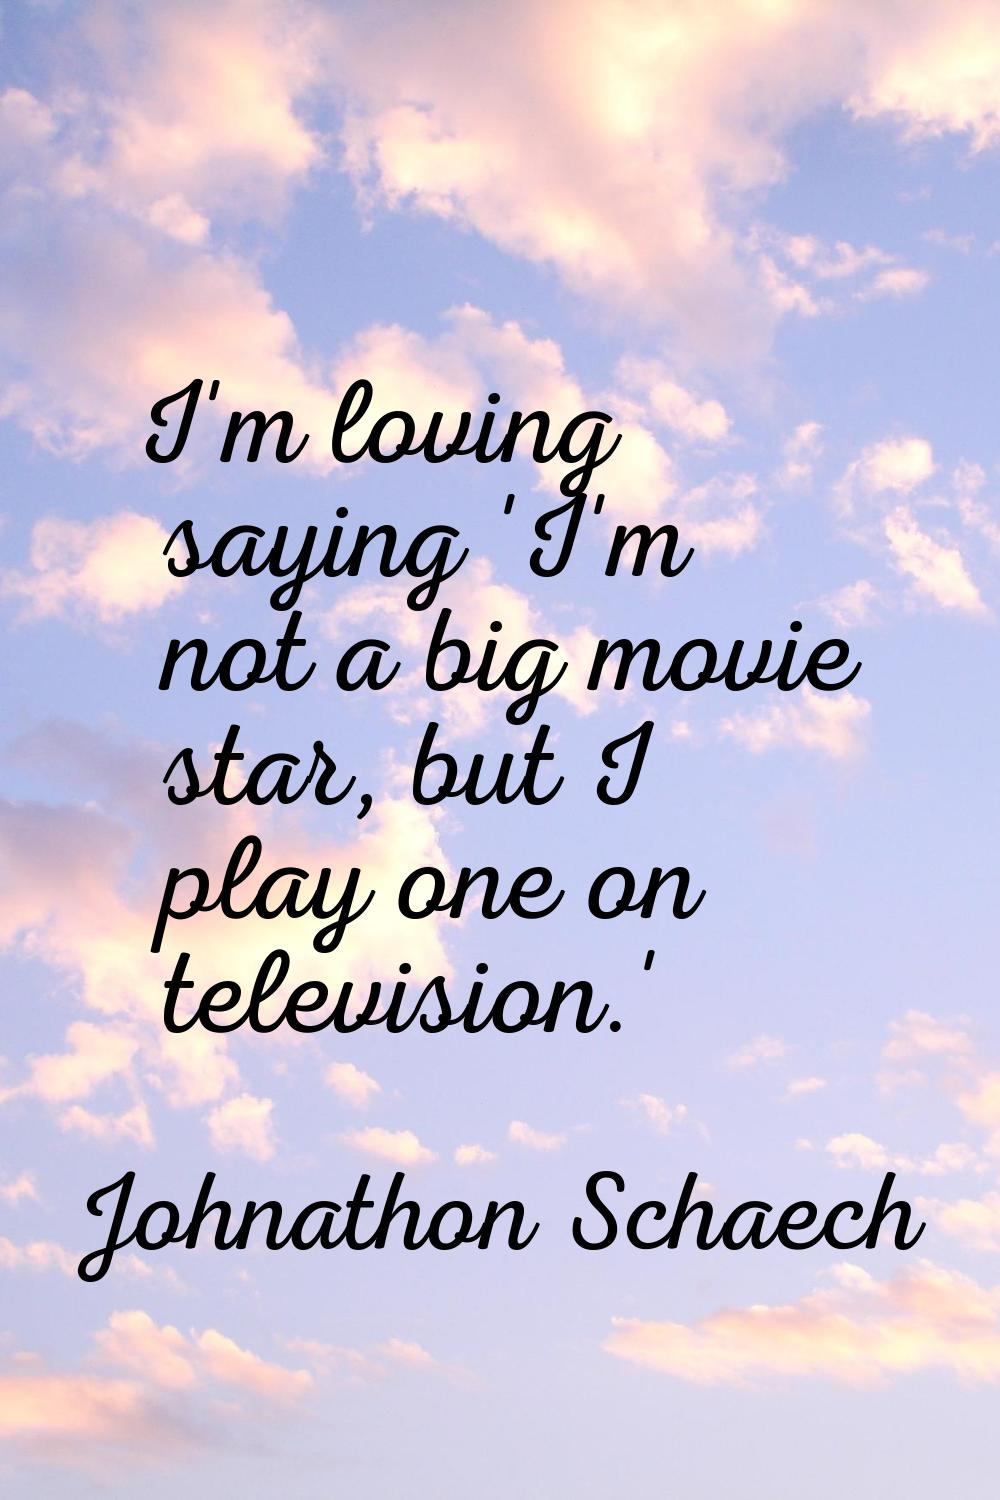 I'm loving saying 'I'm not a big movie star, but I play one on television.'